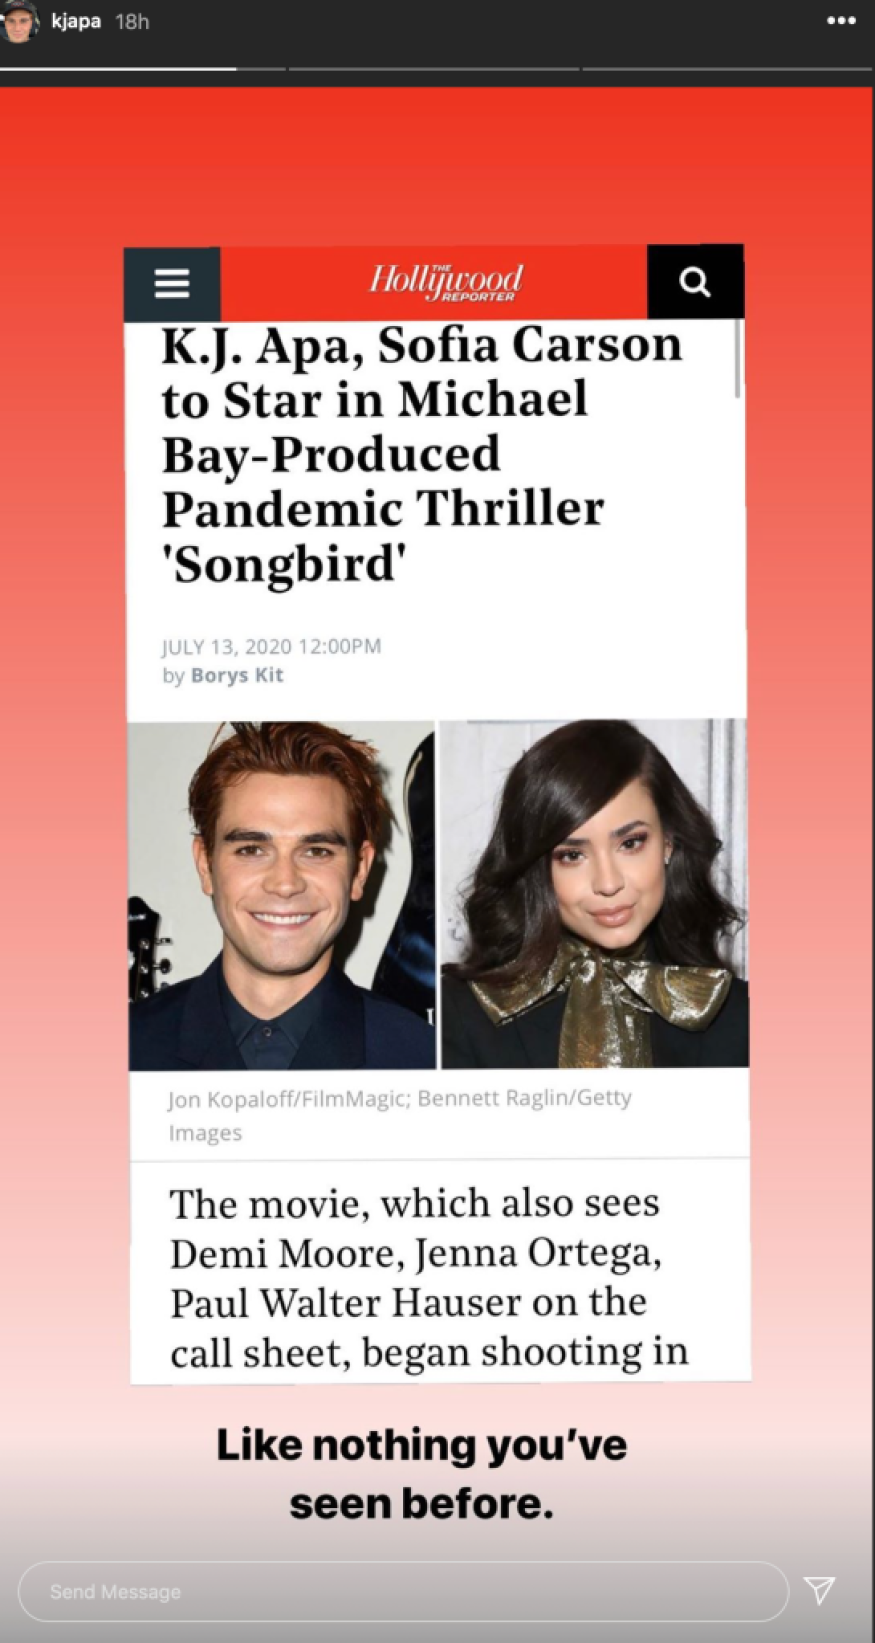 KJ Apa And Sofia Carson Cast In New Movie 'Songbird' Together — Everything You Need To Know